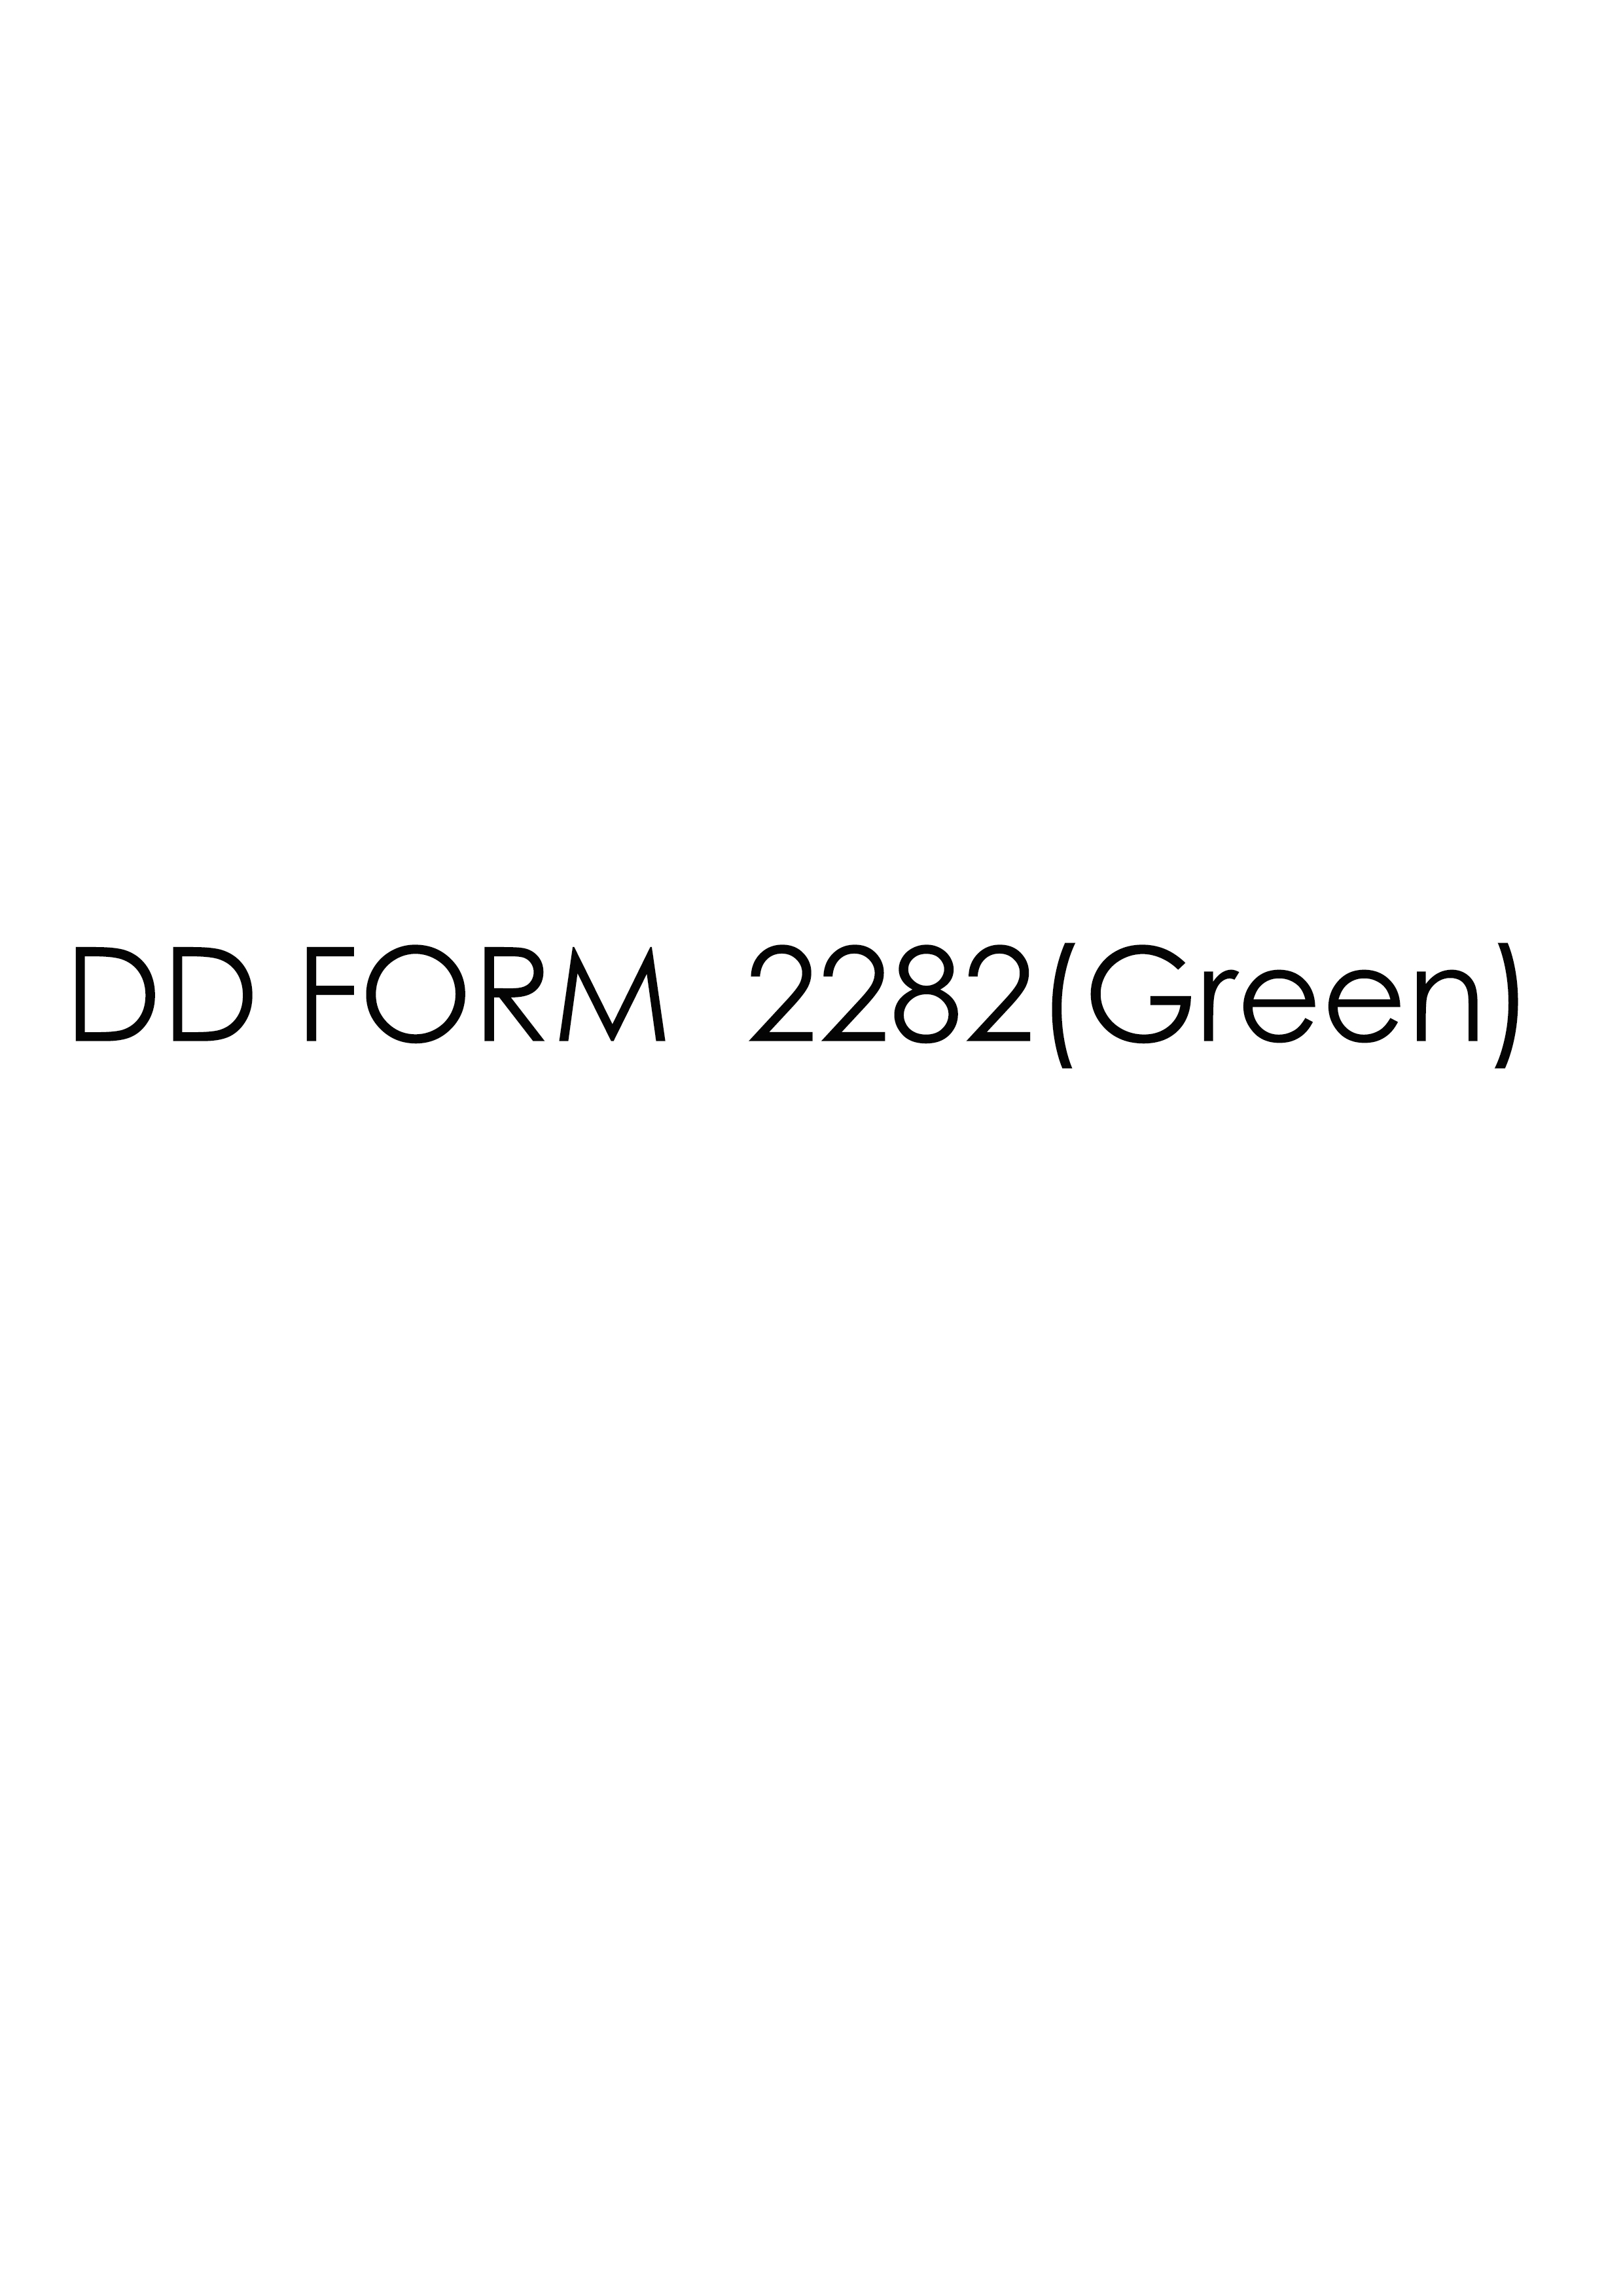 Download Fillable dd Form 2282(Green)